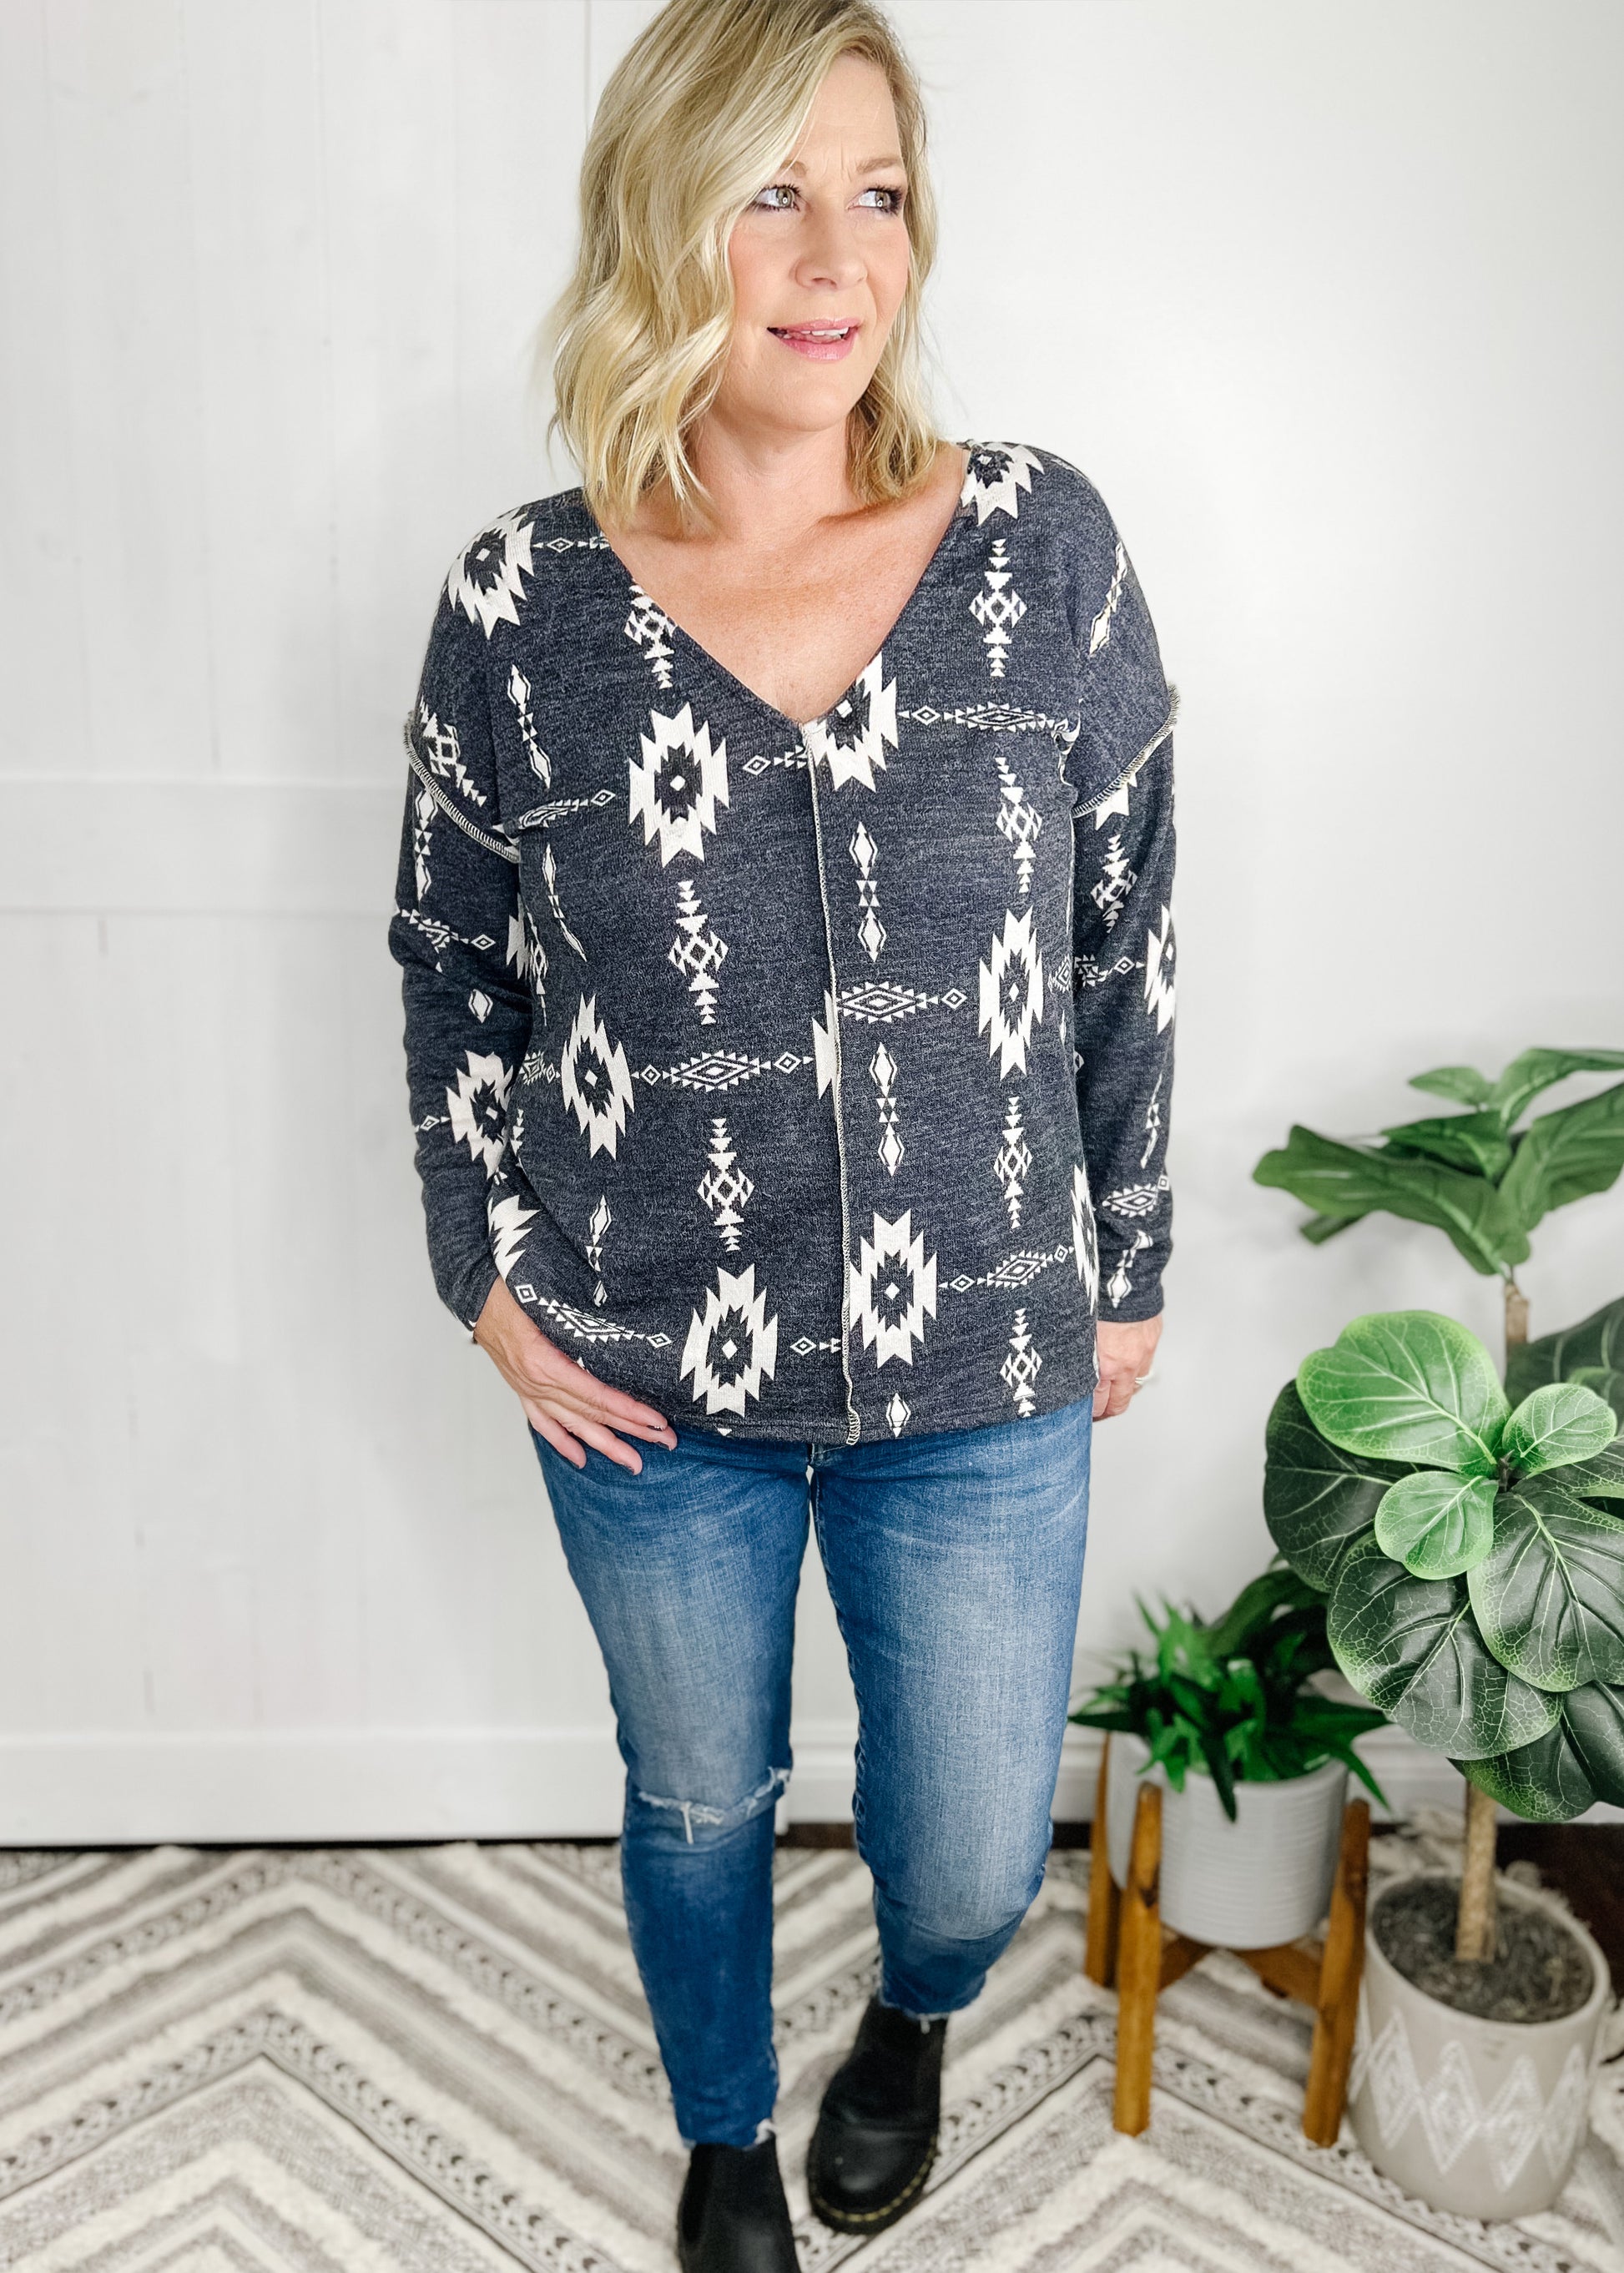 Aztec print  in Charcoal. Top features, deep v neckline, long sleeves, straight hemline, stitch detail going down front and at shoulder.  Shown with out high rise skinny jeans. 